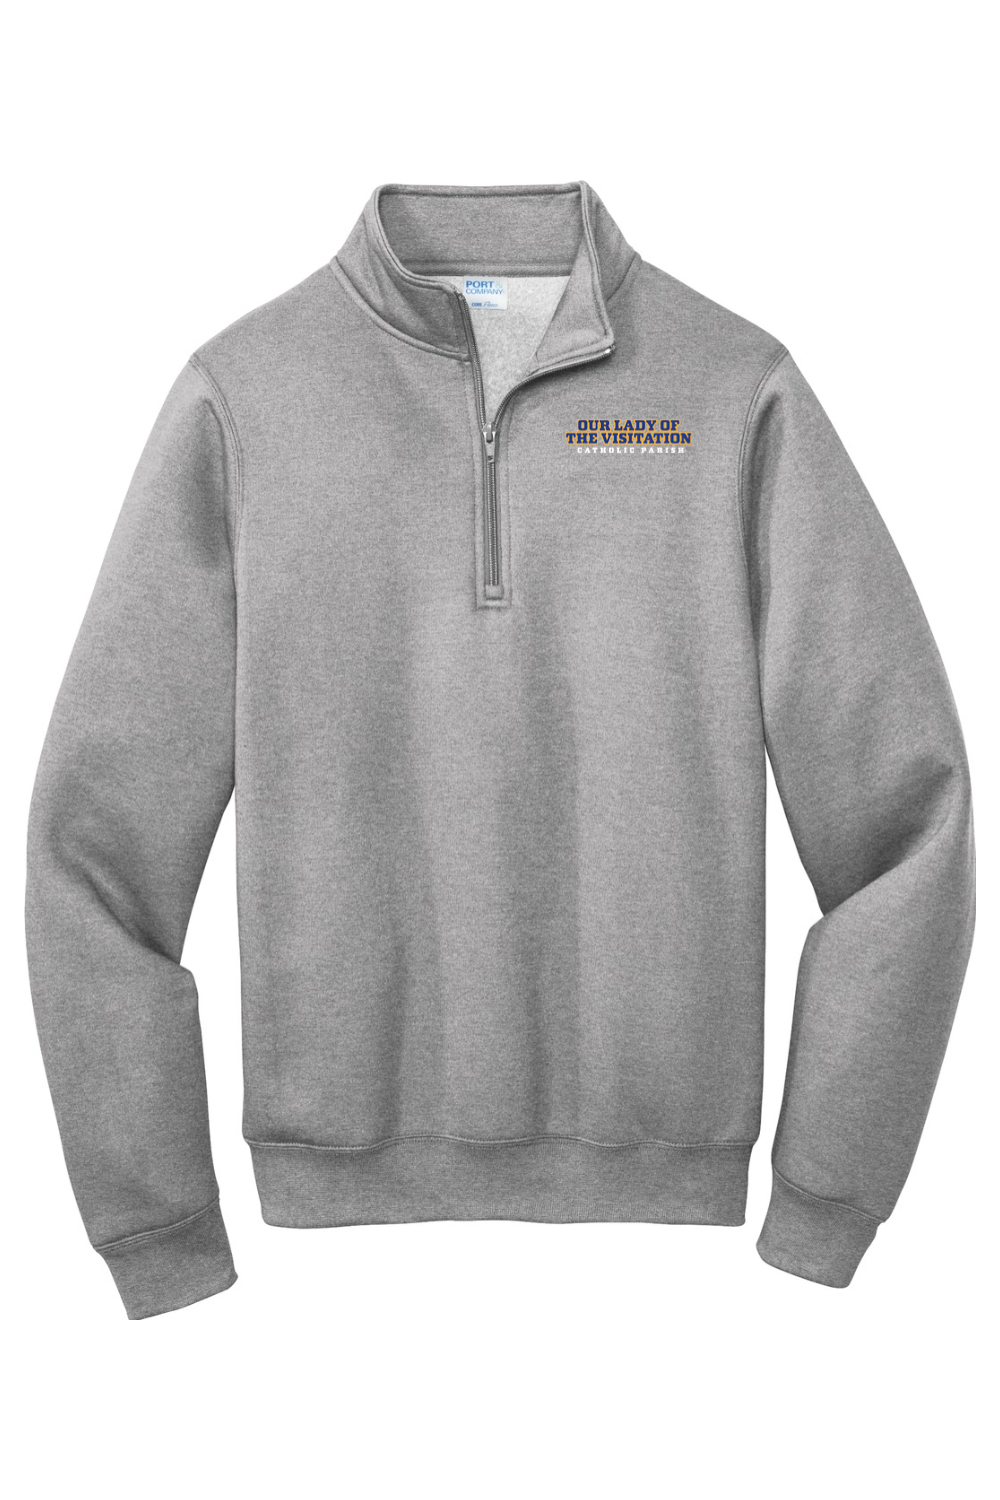 Our Lady of the Visitation Stacked Left Chest Quarter Zip